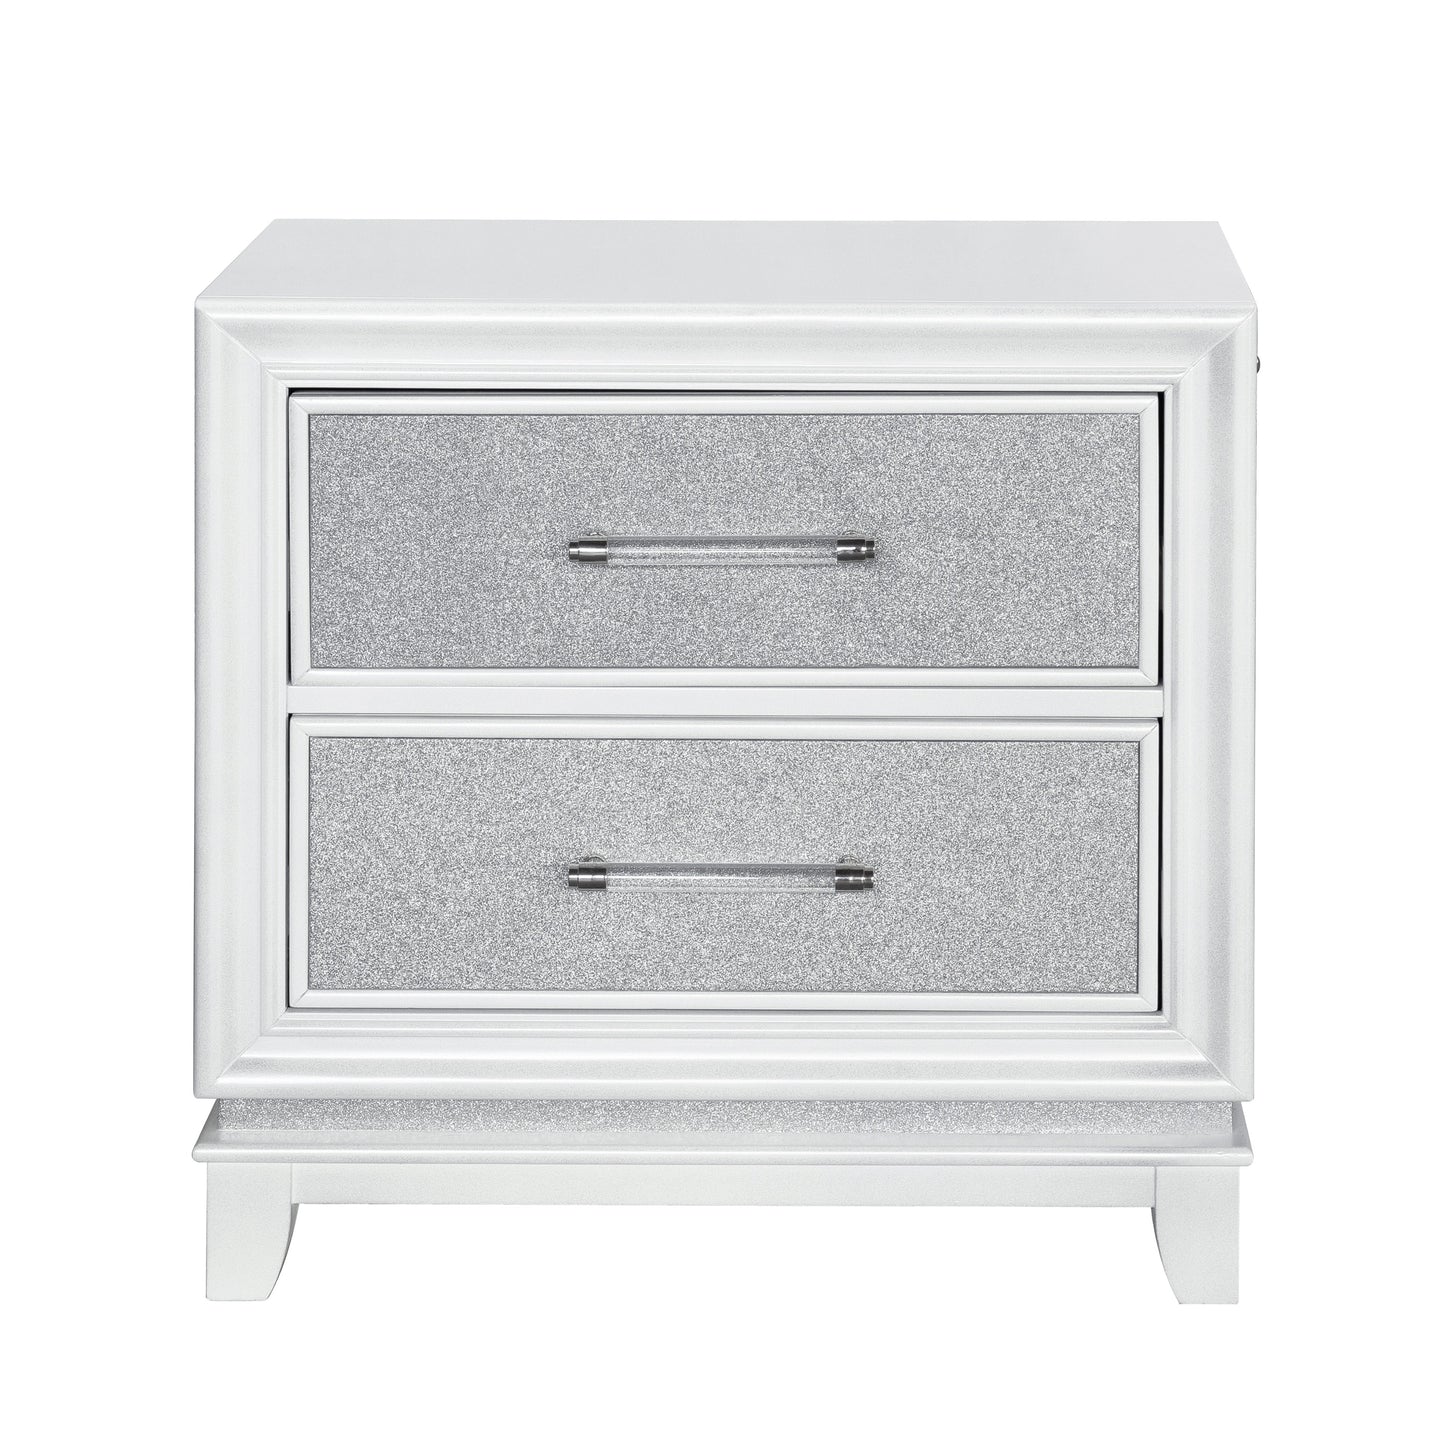 Galaxy 2-Drawer Bedroom Nightstand with LED Lights, Pearlized White